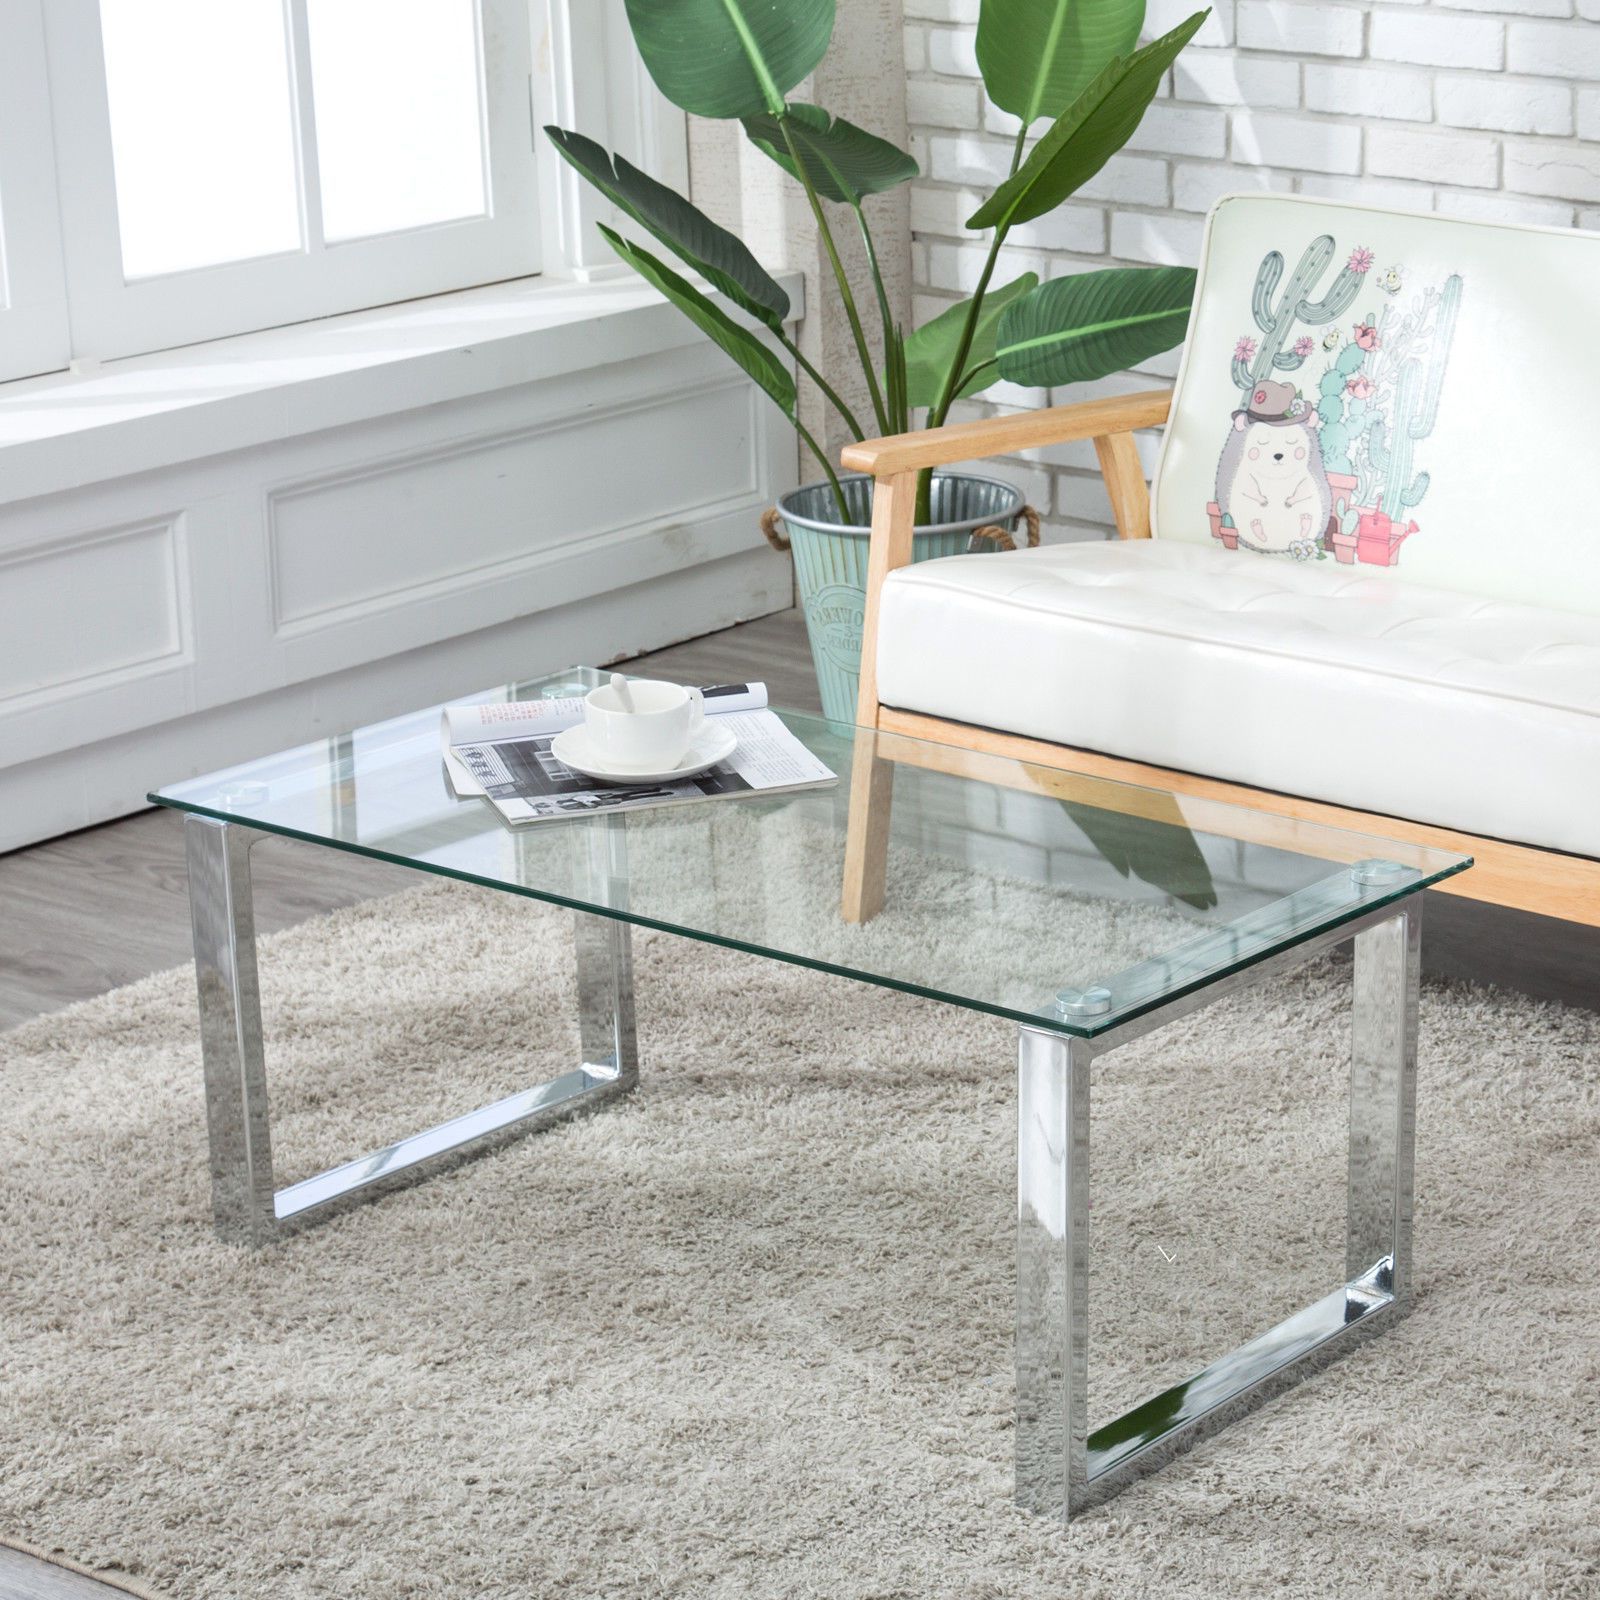 Rectangular Glass Coffee Table Side End Stainless Steel Intended For Preferred Silver Stainless Steel Coffee Tables (View 2 of 20)